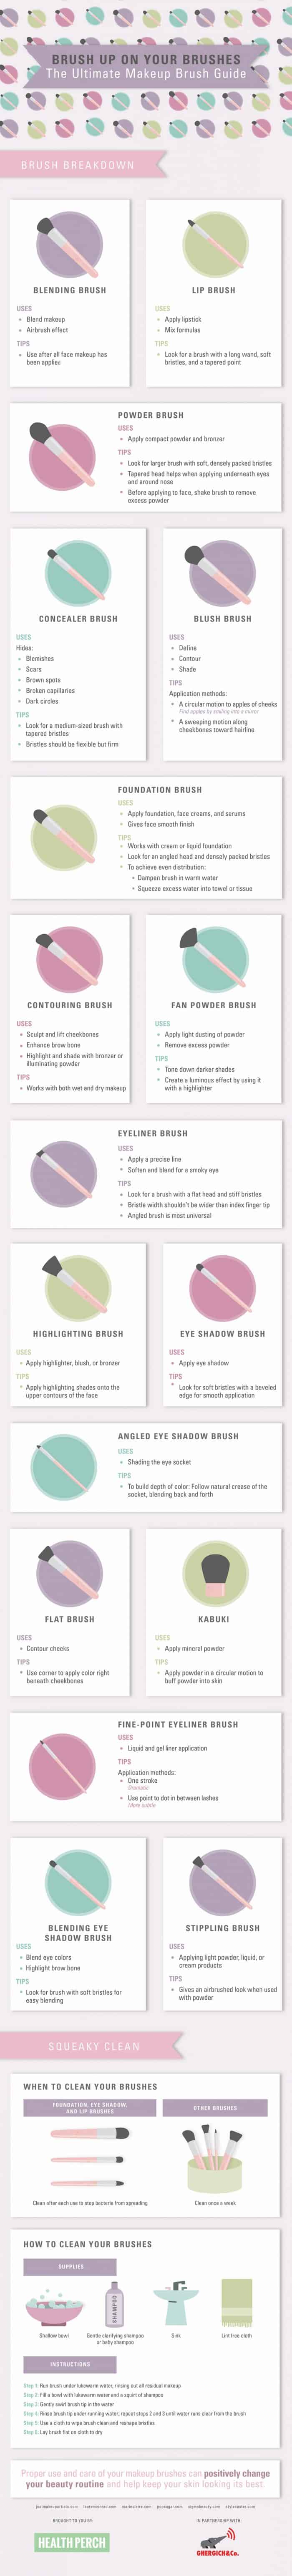 Ultimate Makeup Brushes Guide infographic